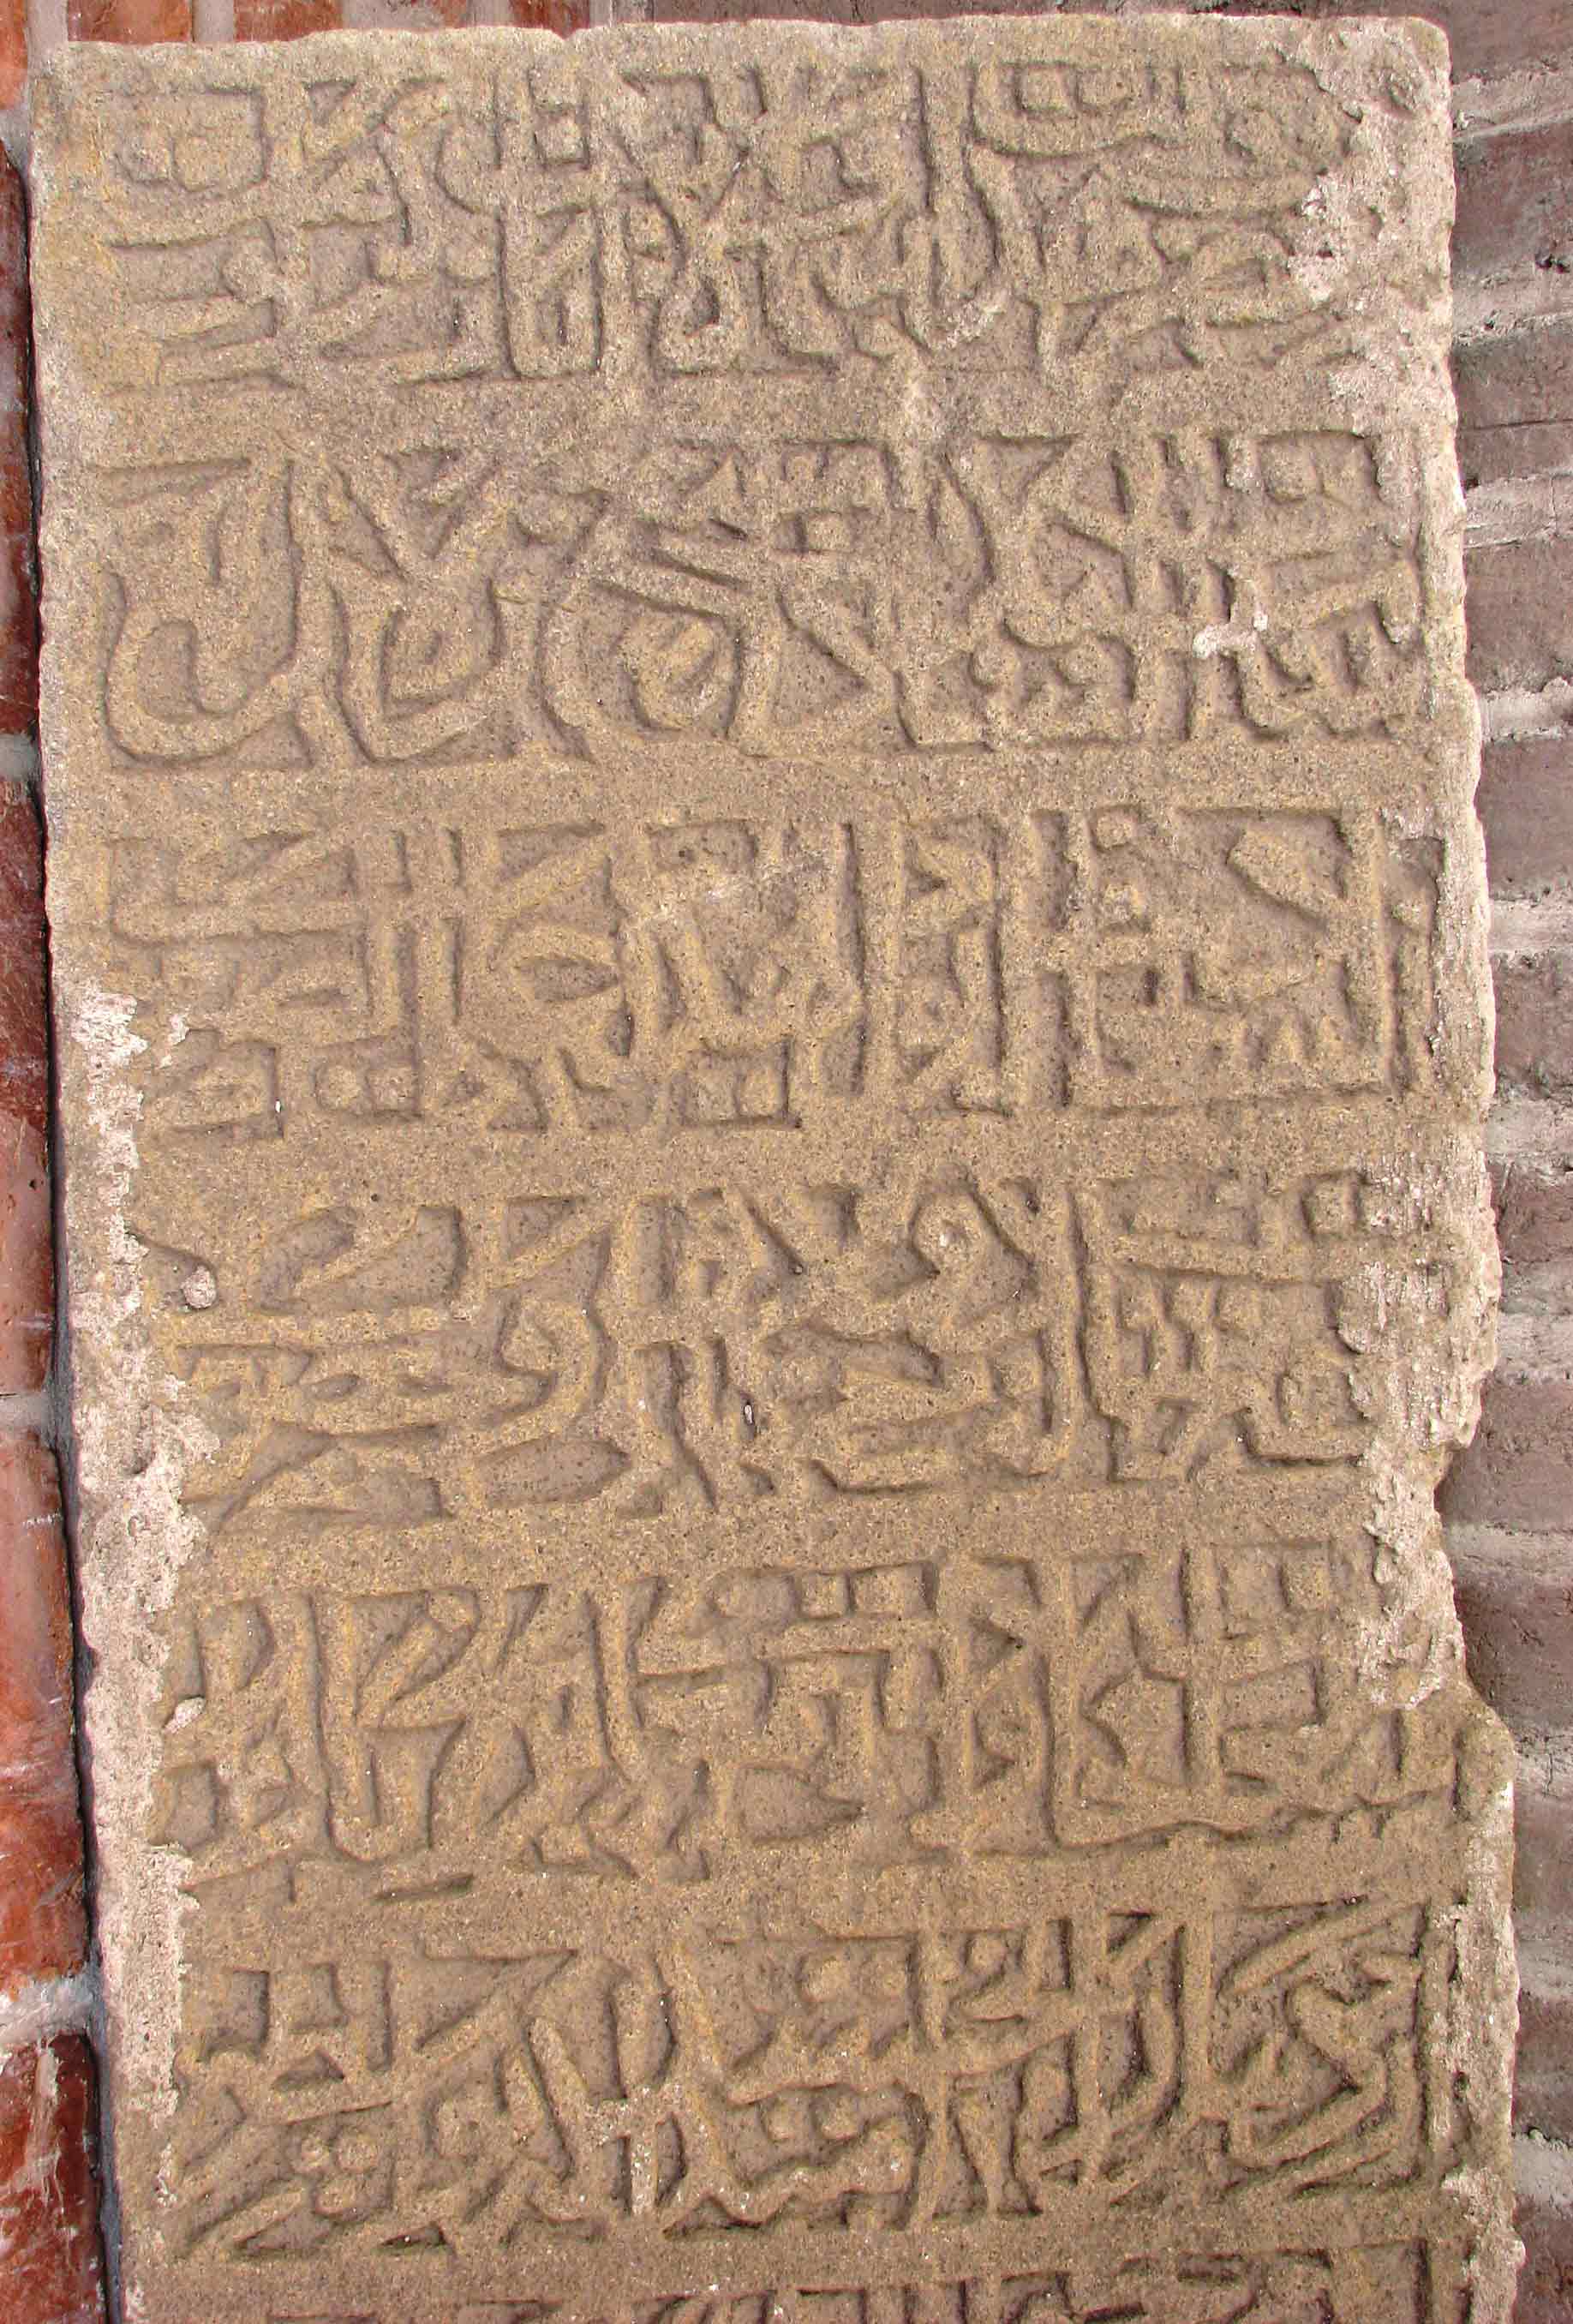 oldest-Stone-writing-proving-Safavid-Siadat-and-desendency-from-Prophey-Muhammad---Web-optimized